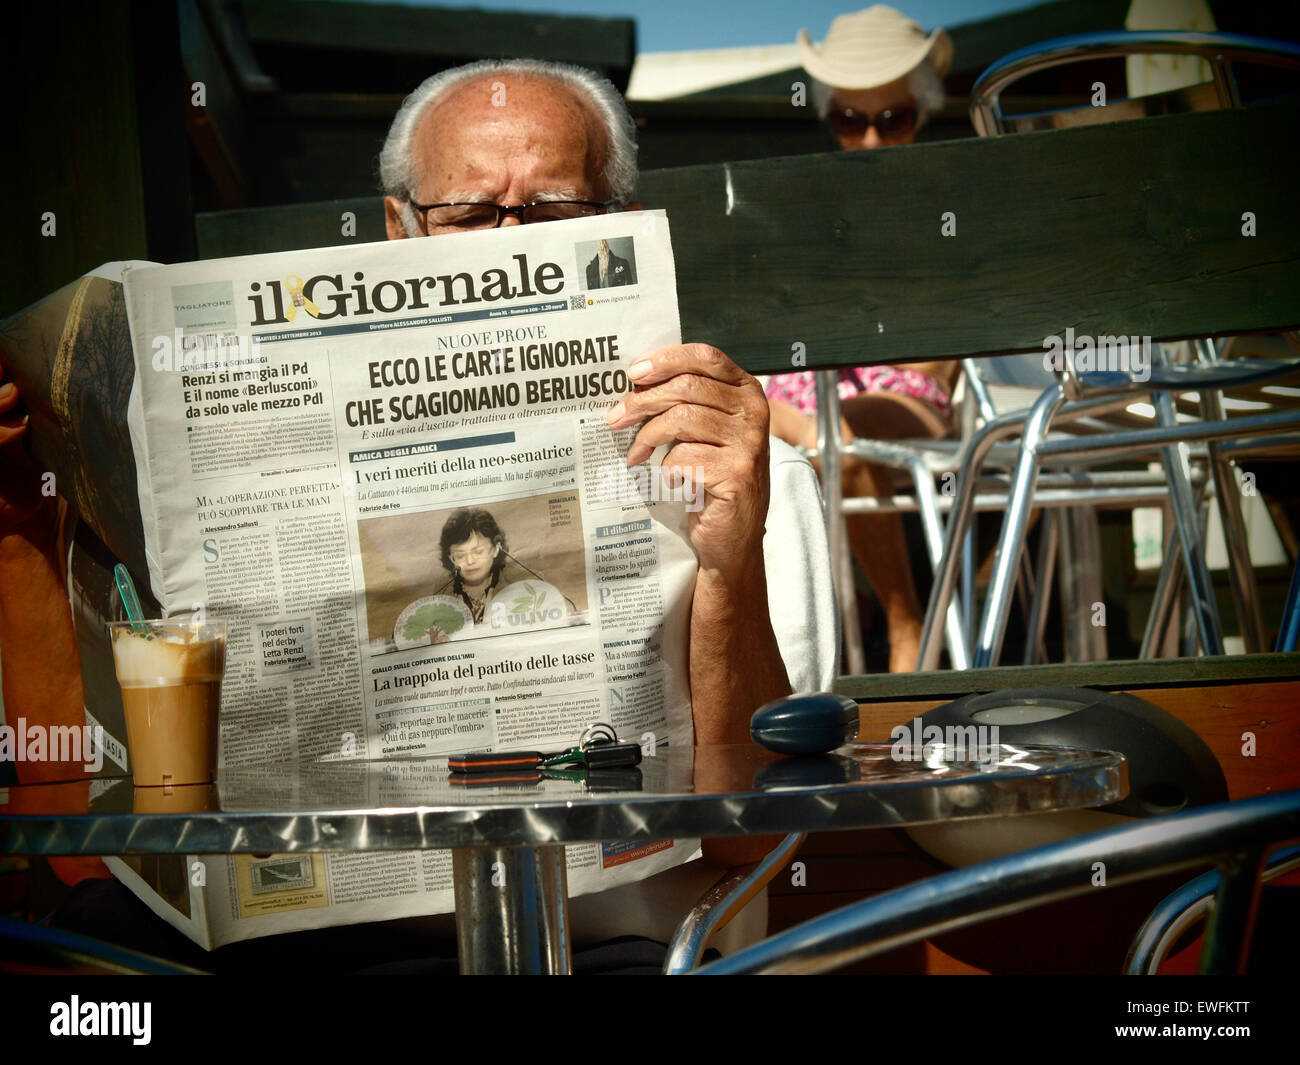 Man reading an Italian newspaper in a cafe in Italy Photo - Alamy